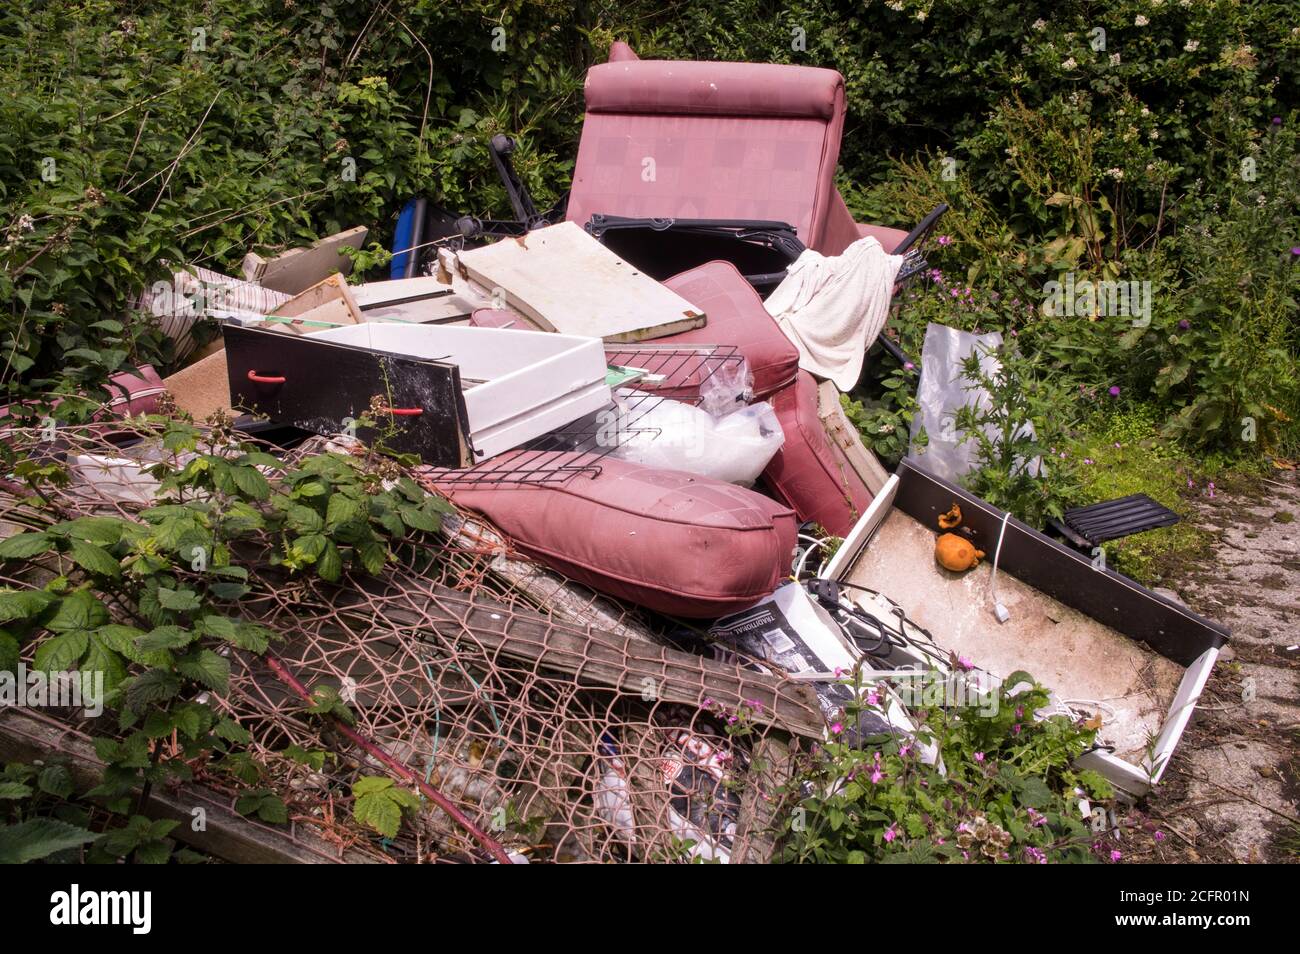 Rubbish dumped in a quiet area of countryside. This is a major problem in rural and suburban areas. Stock Photo